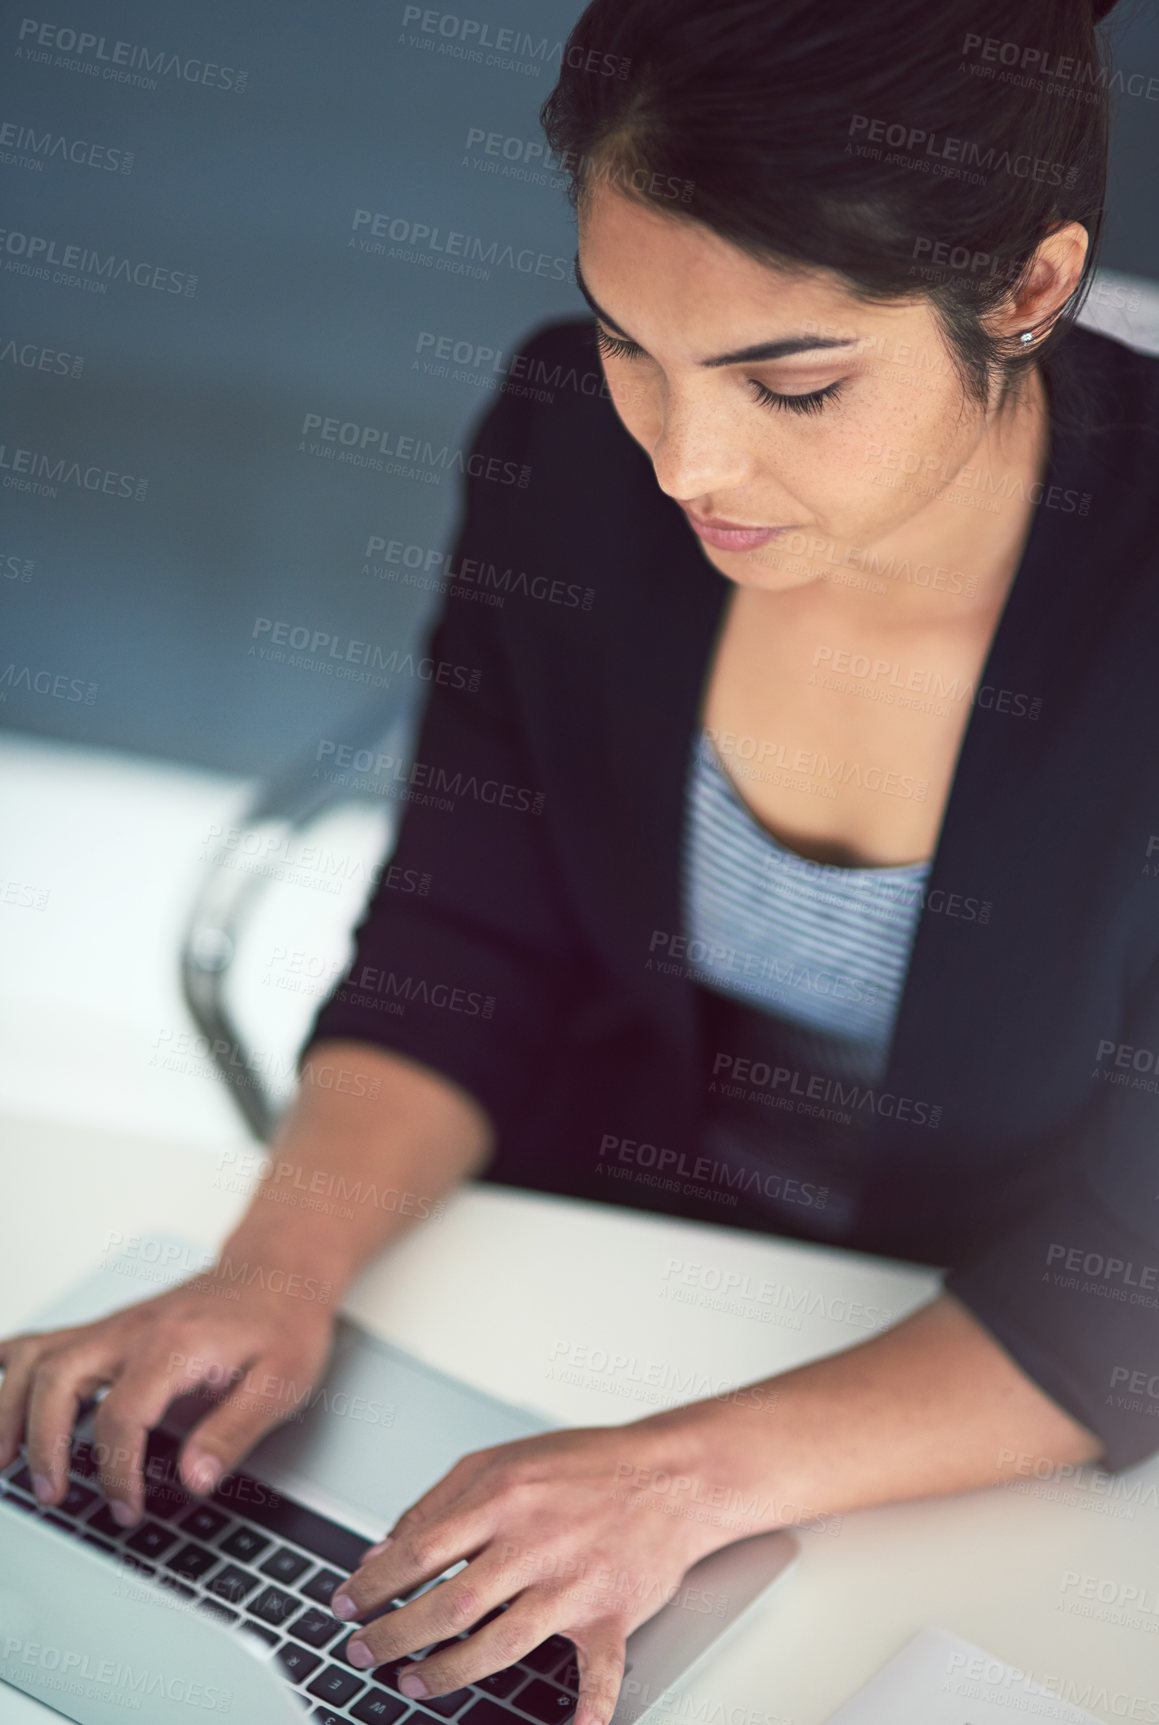 Buy stock photo High angle shot of an attractive young businesswoman working on a laptop in her office